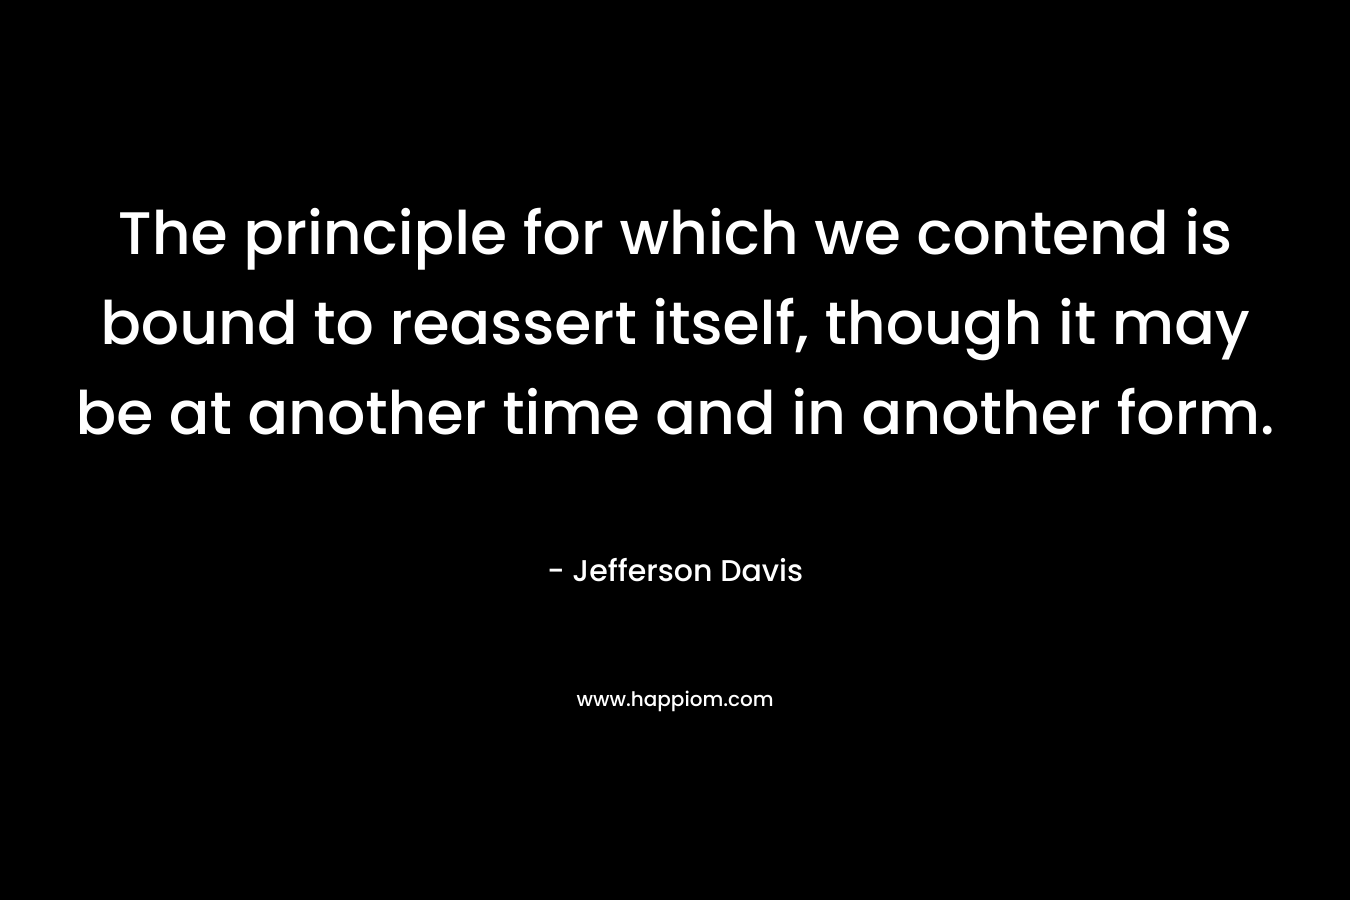 The principle for which we contend is bound to reassert itself, though it may be at another time and in another form. – Jefferson Davis